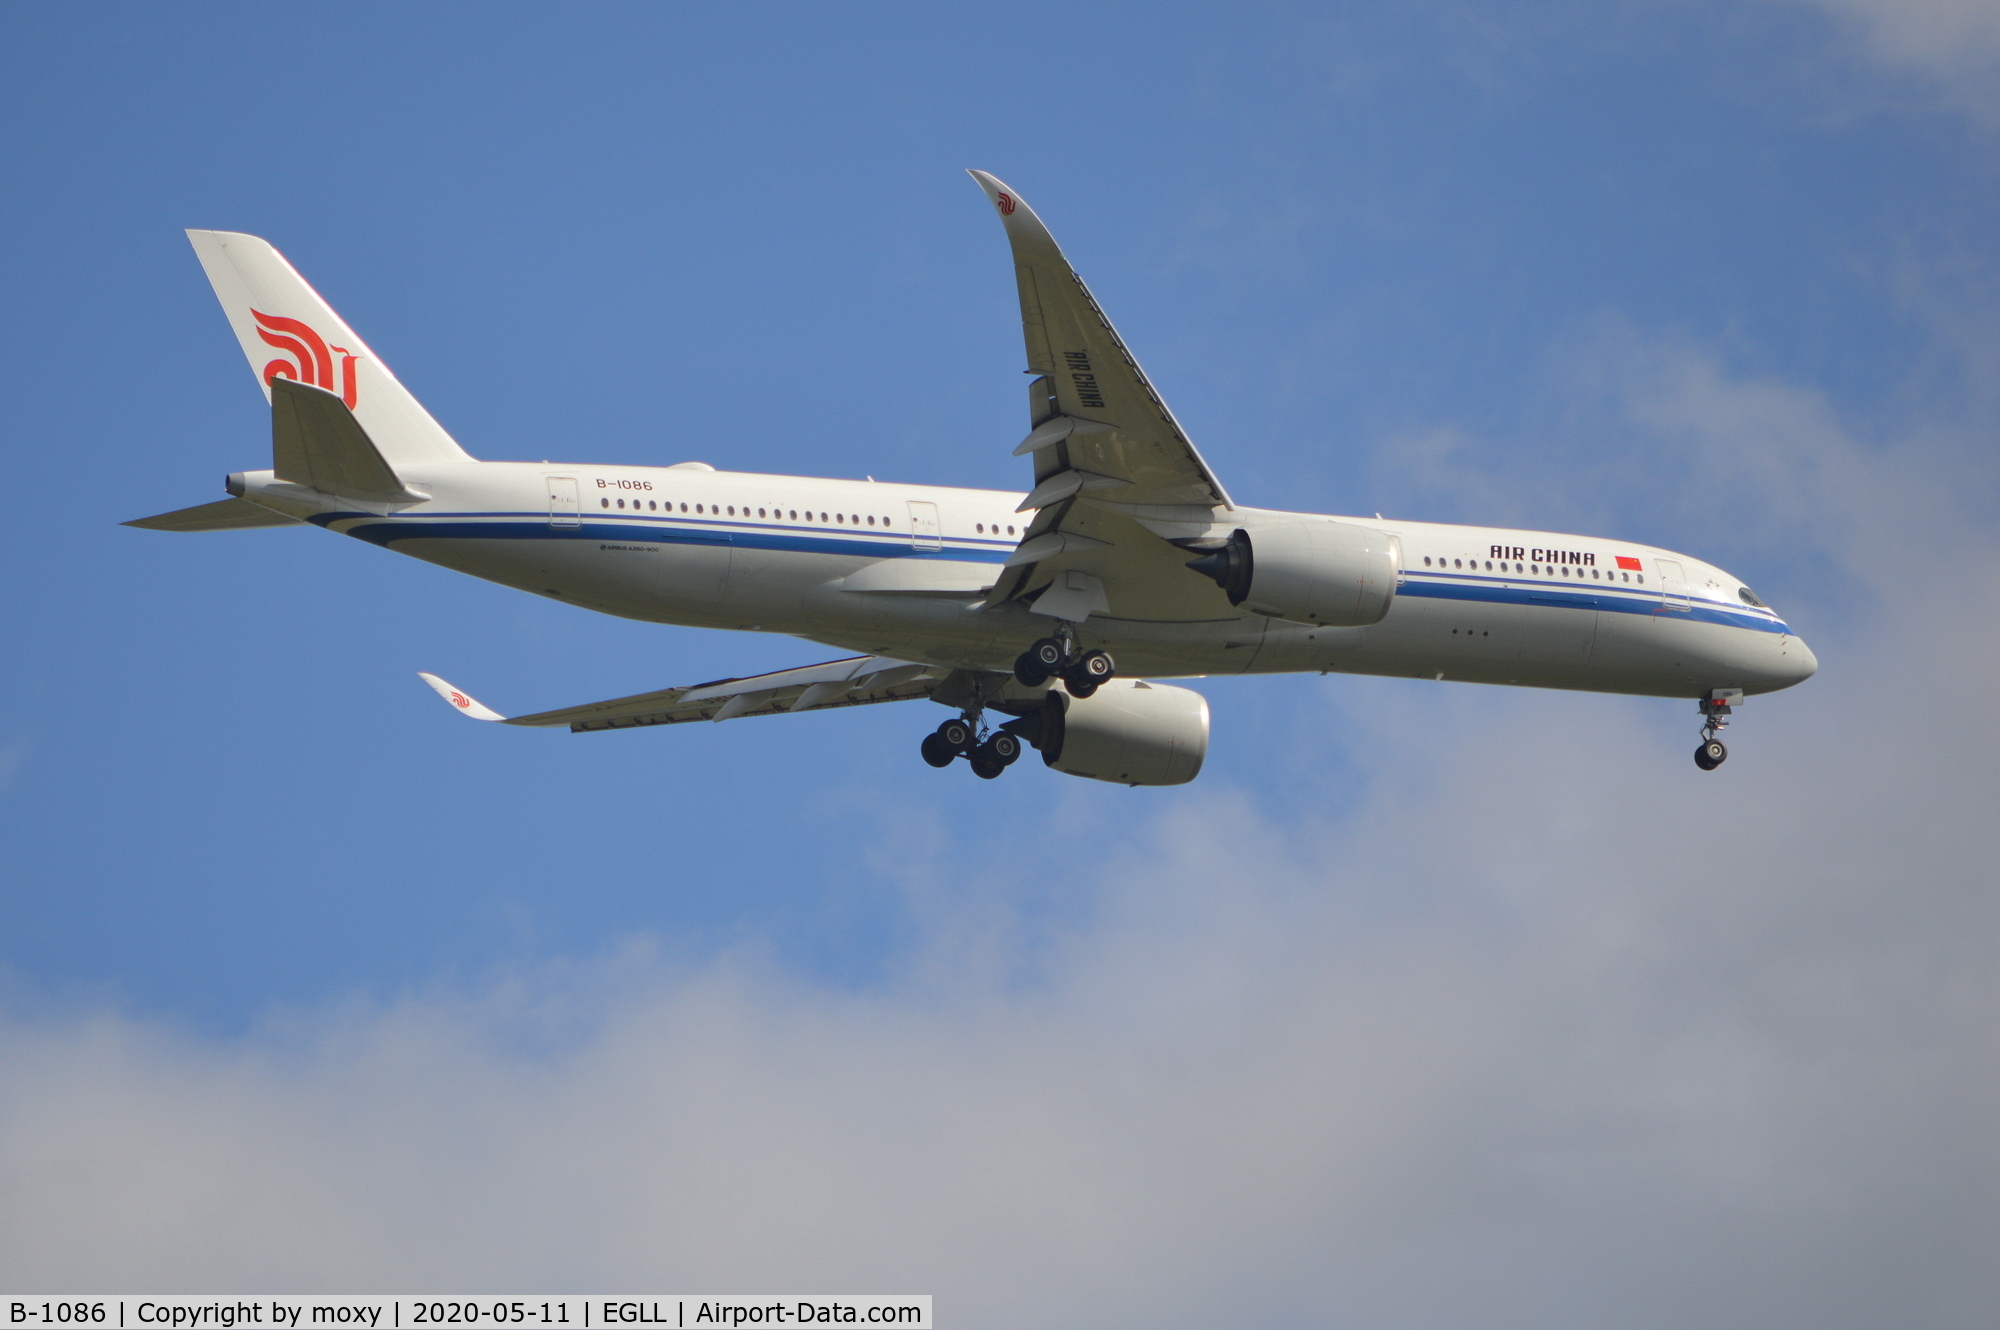 B-1086, 2017 Airbus A350-941 C/N 167, Airbus A350-941 on finals to London Heathrow.